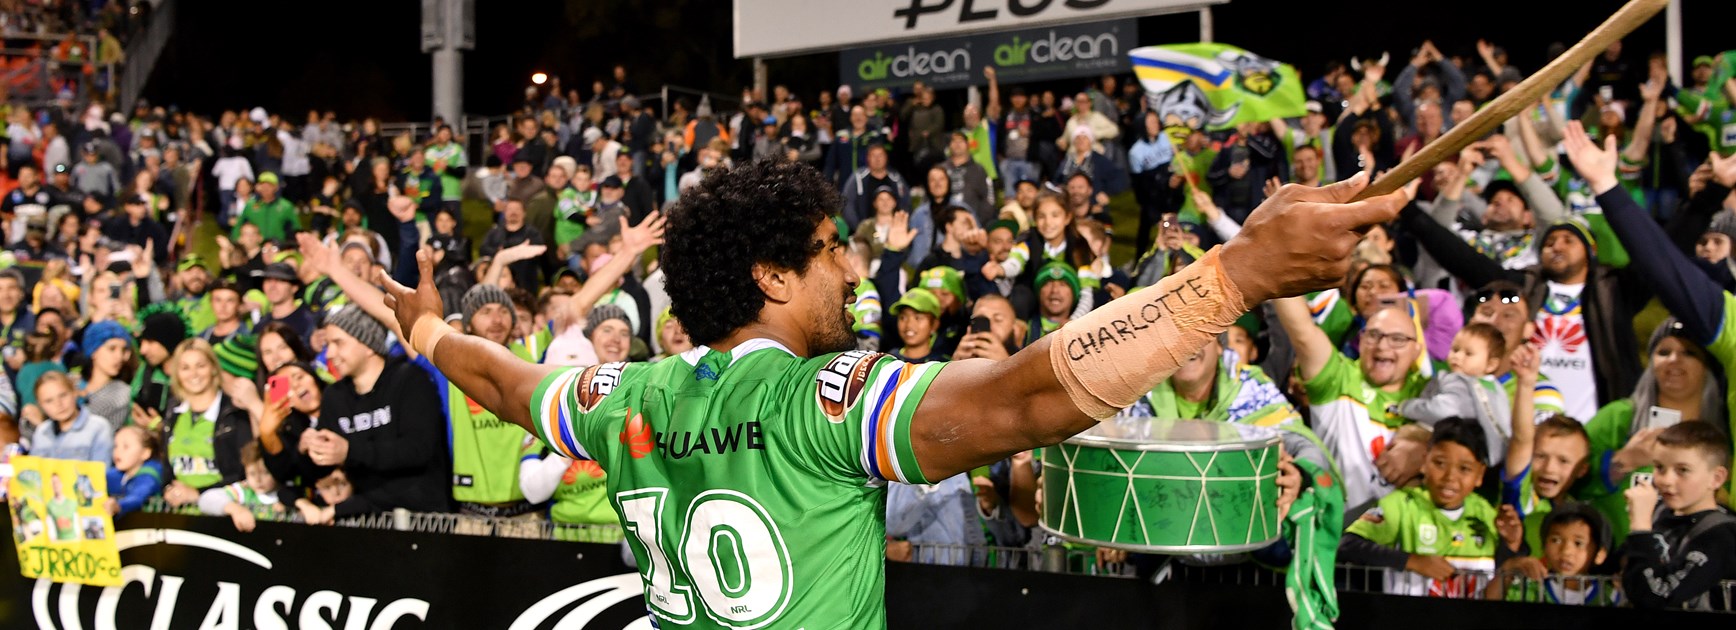 Fan favourite Soliola calls time on 17-year career